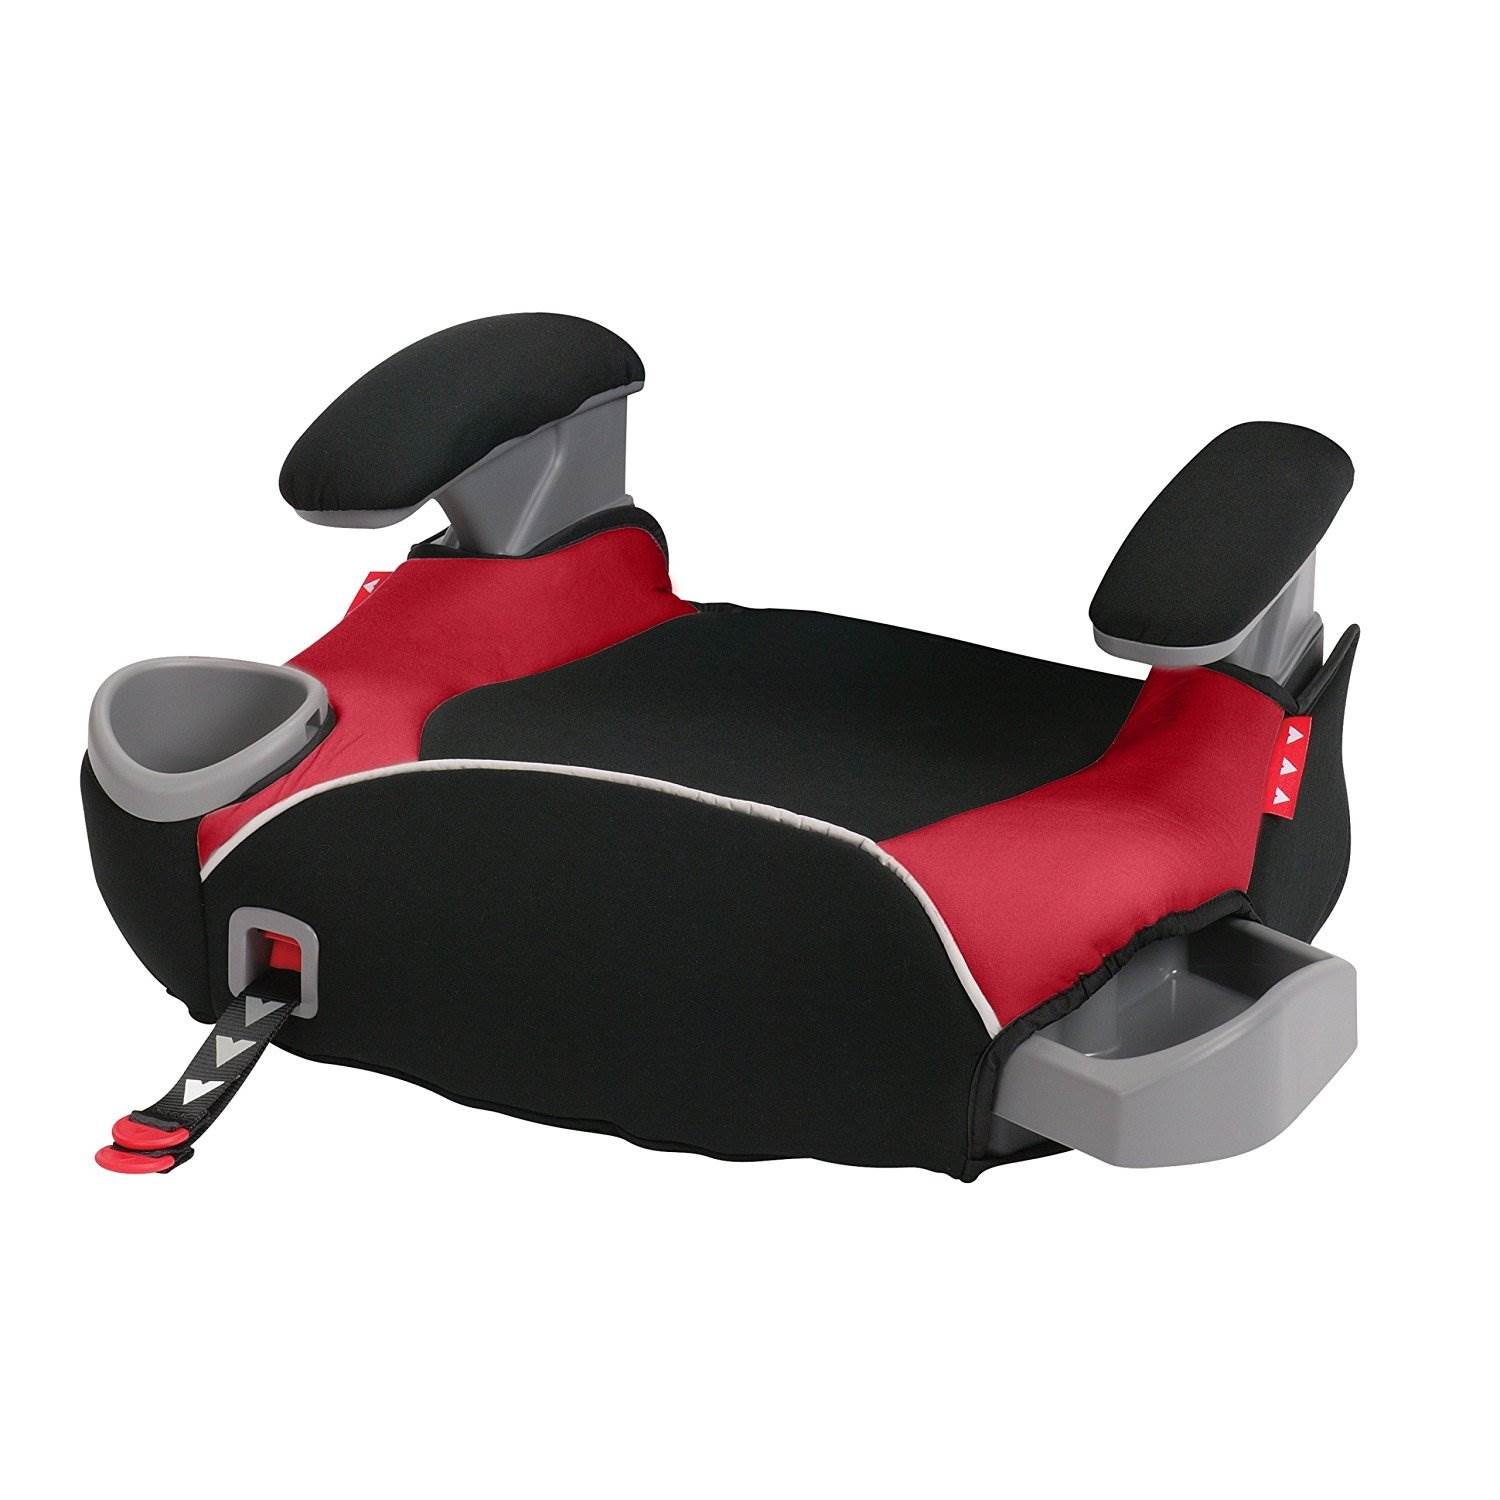 Graco Affix Highback Forward Facing Booster Car Seat with Latch System, Atomic - image 4 of 6